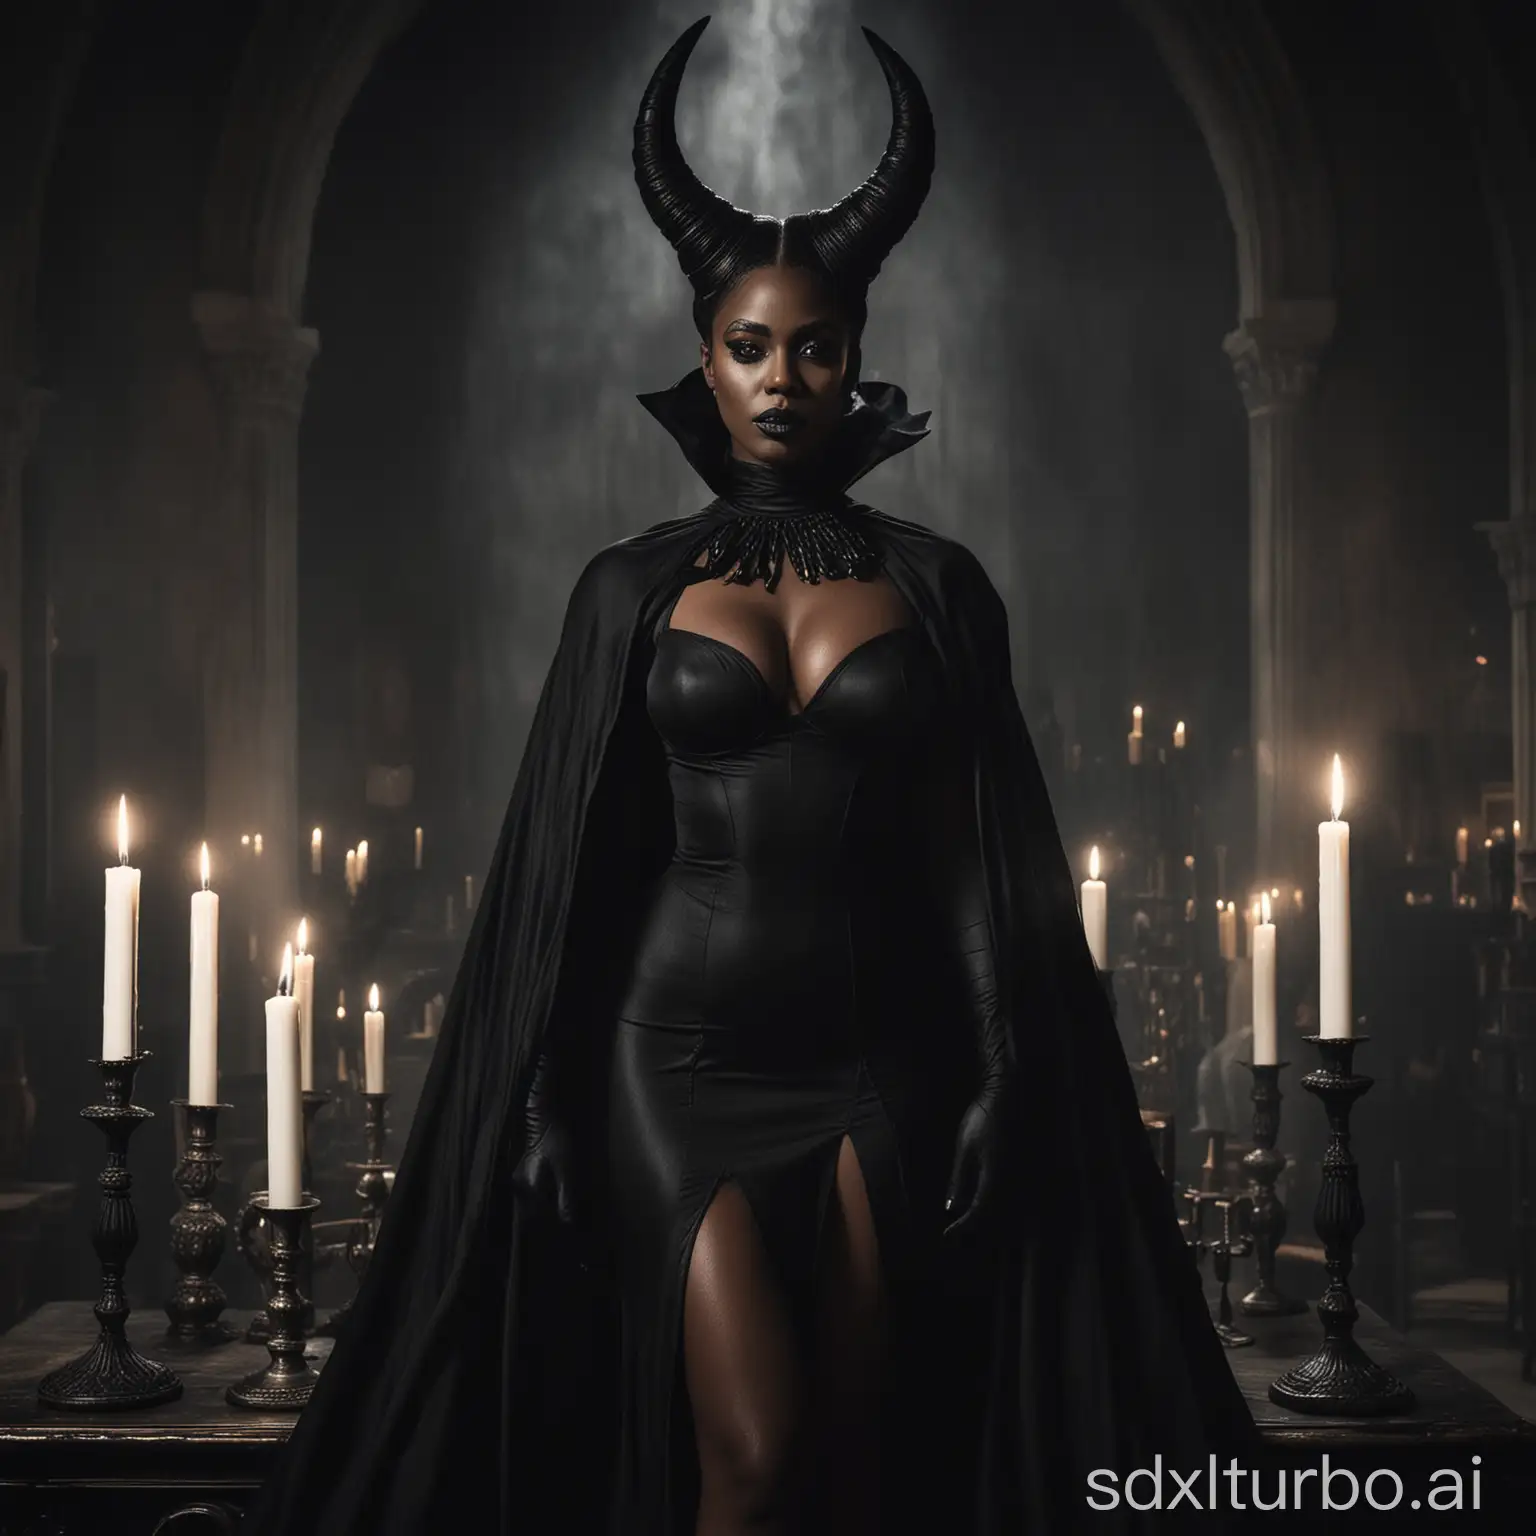 a majestic and powerful black woman, with horns .black makeup, large breasts exuding an aura of authority. Her imposing presence is accentuated by an air of mystique. Her dark costume and black cape with a high collar further accentuate her imposing presence, she is standing wearing high heels. The enchanting atmosphere is deepened by two with a lit black candles that casts mysterious shadows. This captivating scene masterfully combines mystery and power